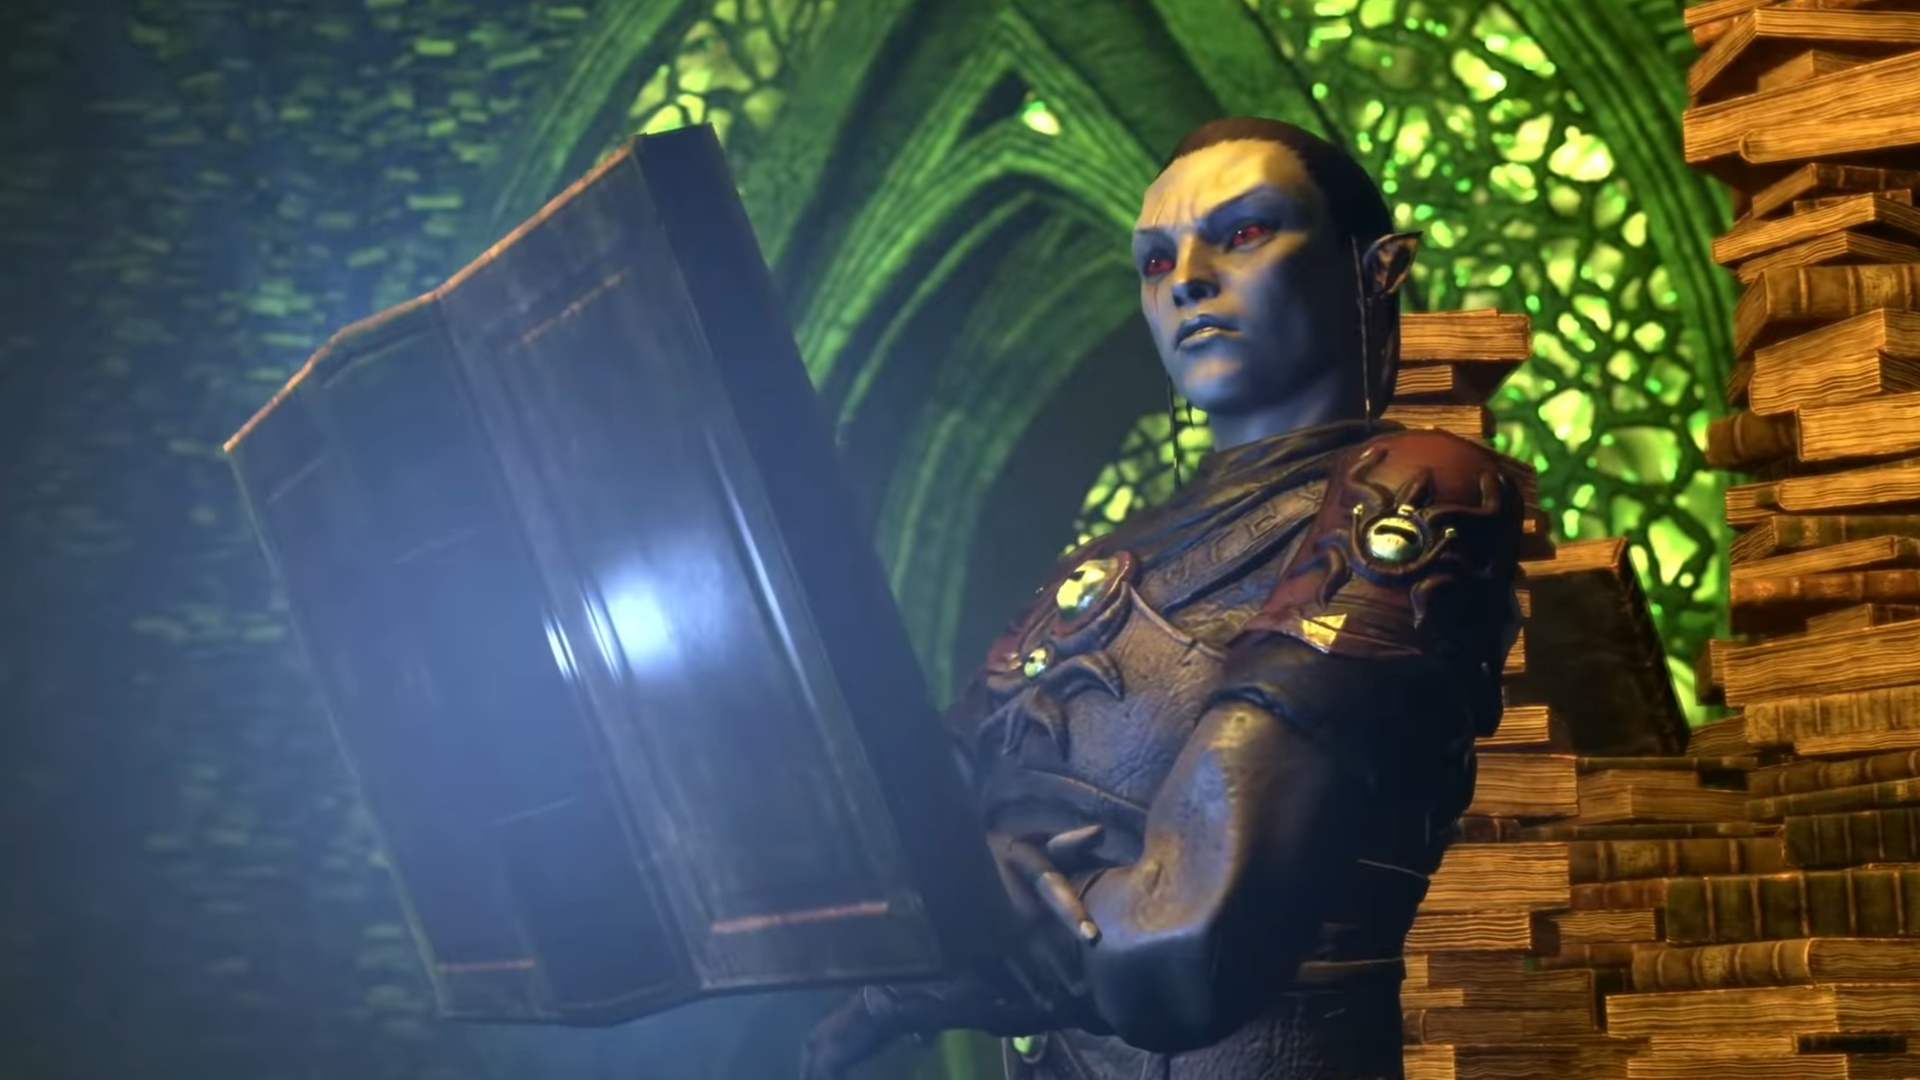 The new Arcanist ESO class borrows flexibility from World of Warcraft